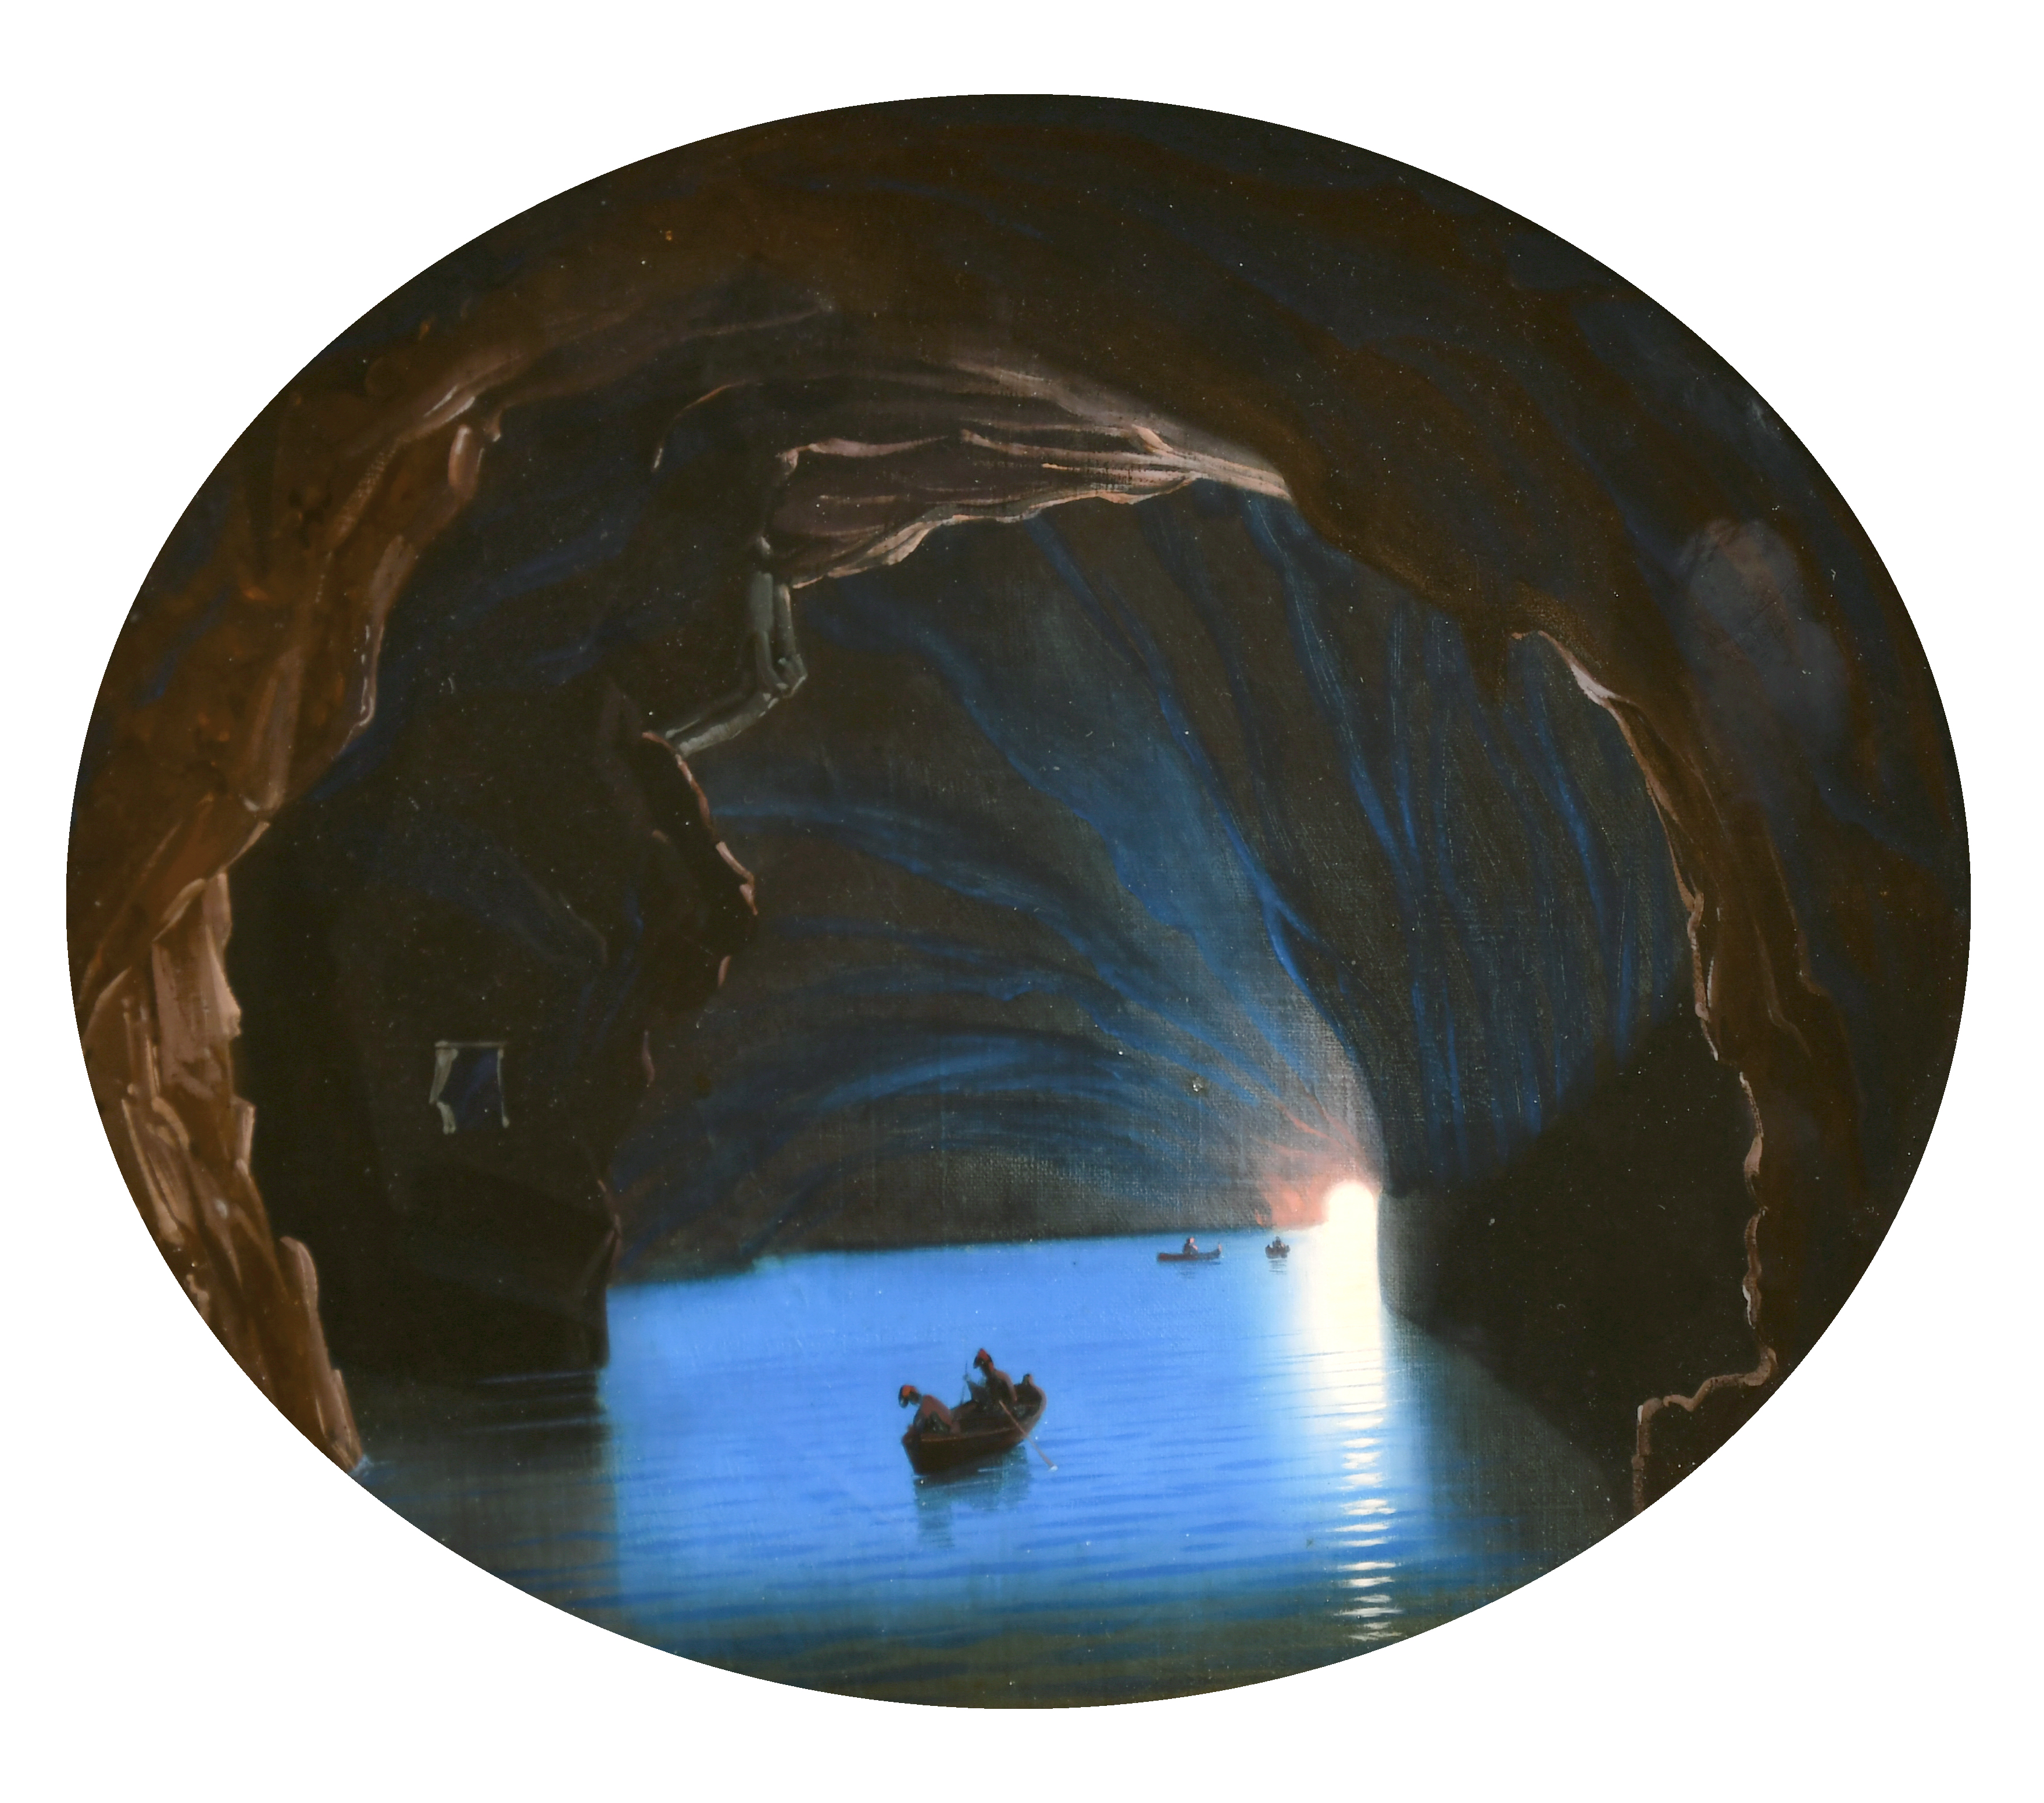 19th Century Italian School. ‘The Blue Grotto’, Oil on Glass backed by Canvas, Inscribed on label on